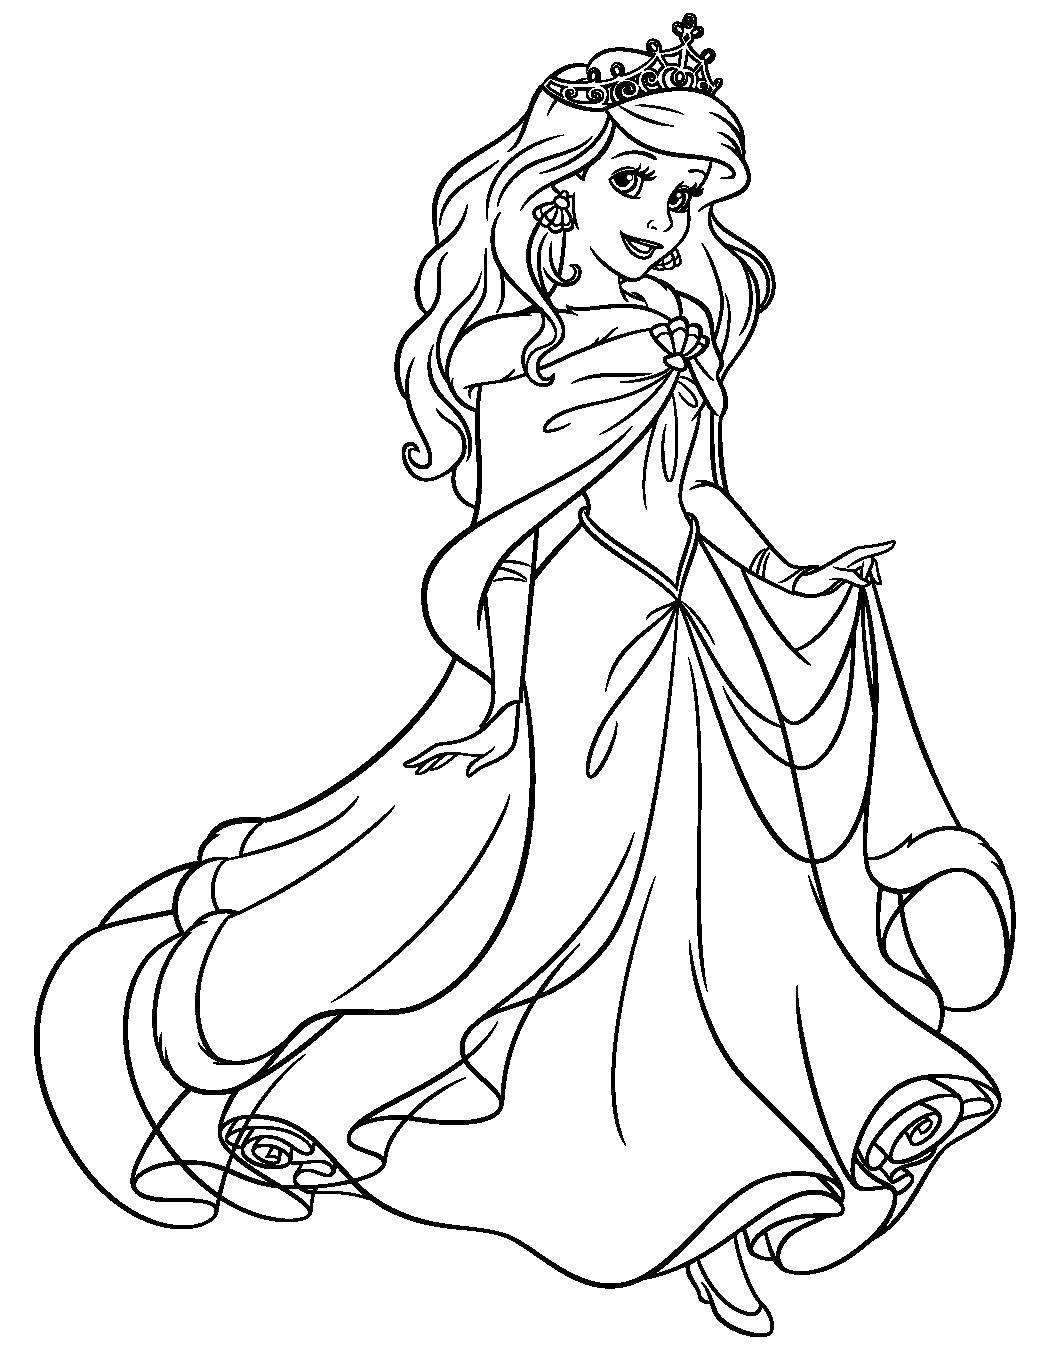 Coloring Mermaid Ariel in a dress. Category the little mermaid Ariel. Tags:  Mermaid, Ariel.